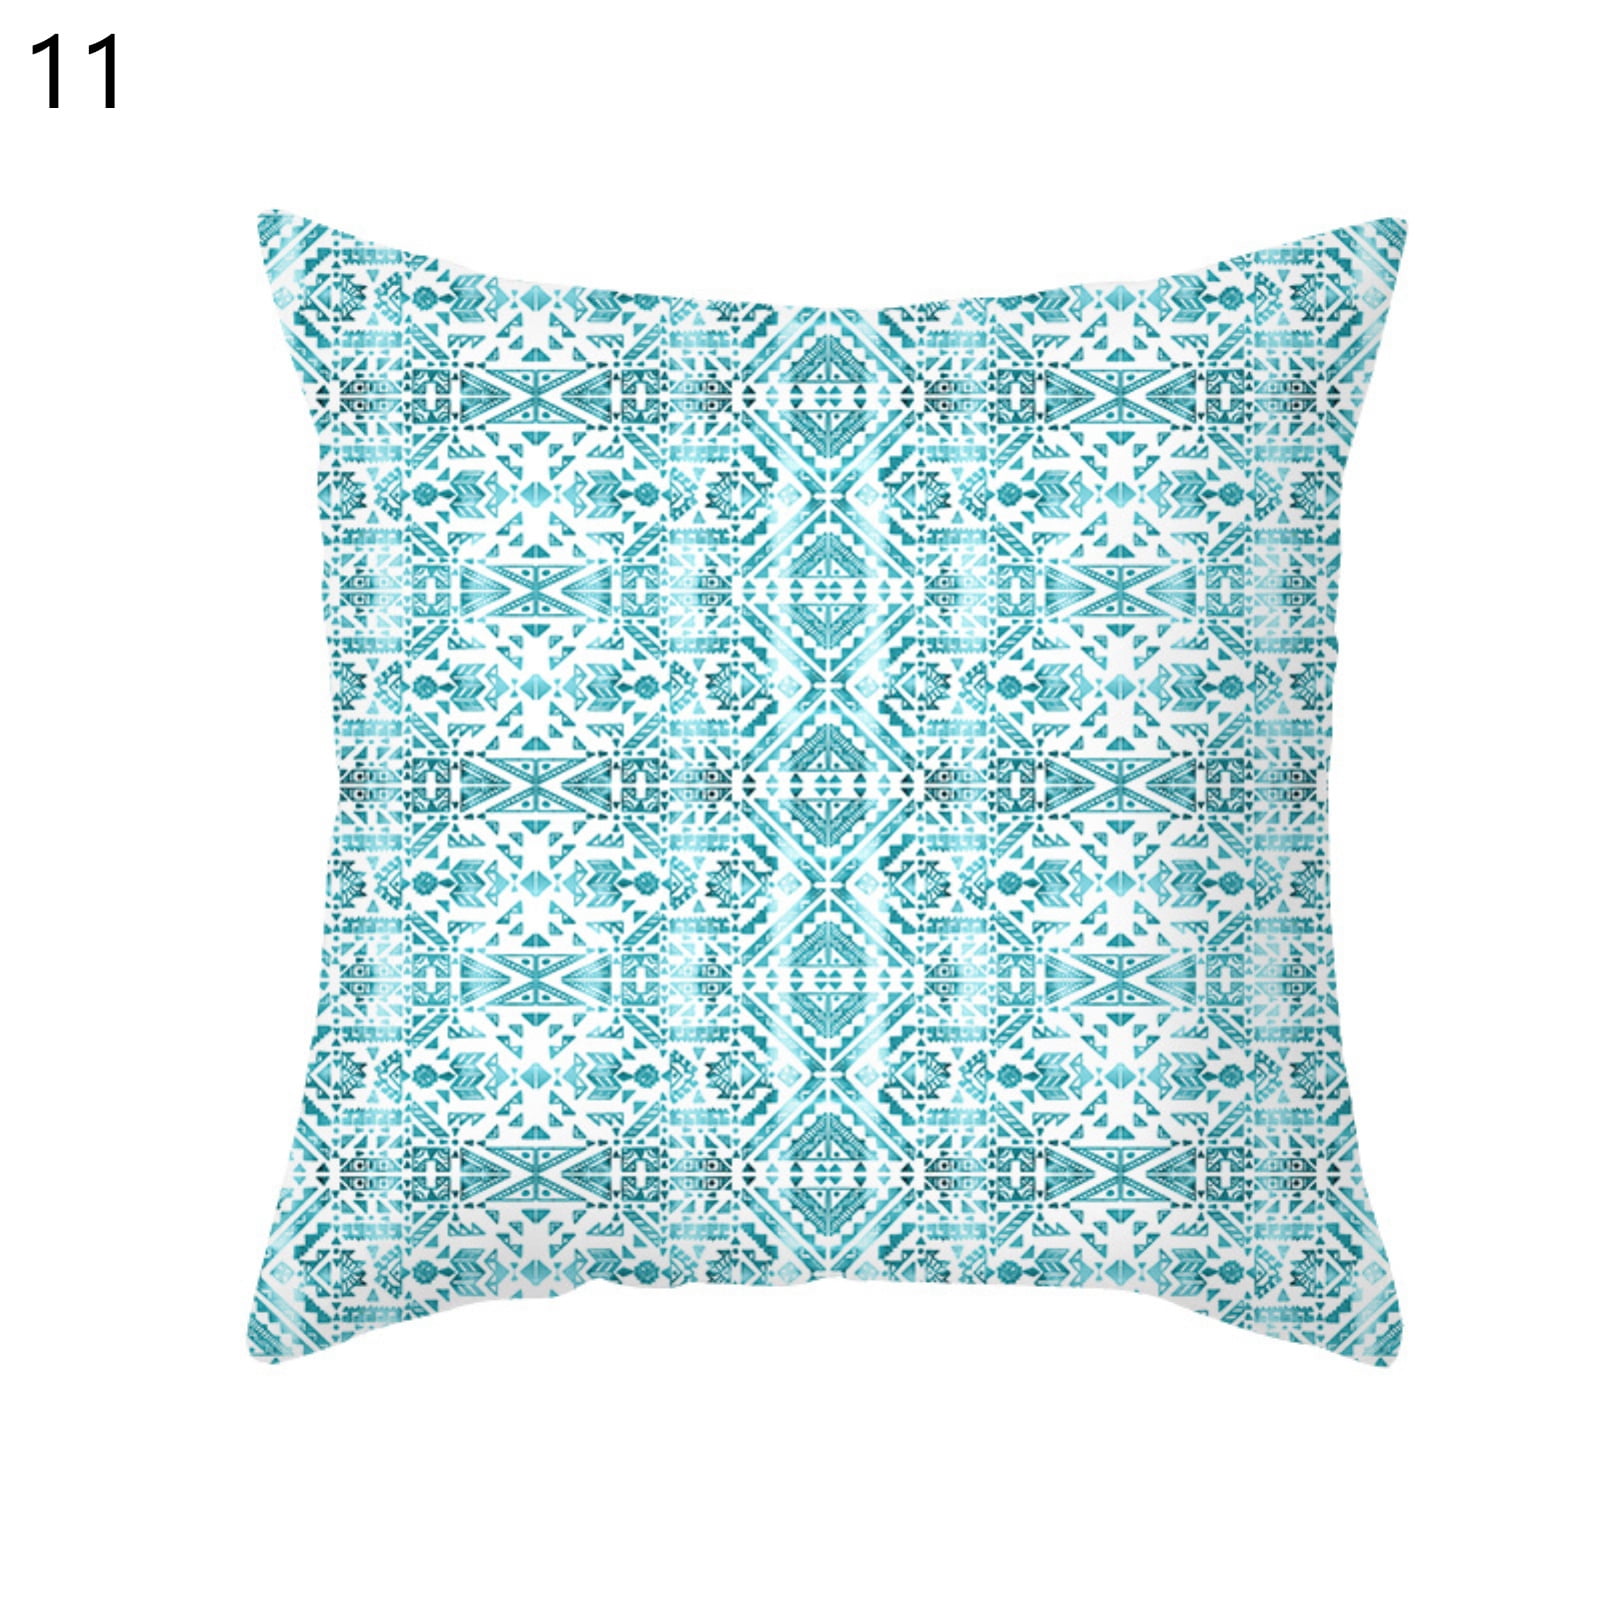 Decorative Blue 18x18 (45x45 cm) Pillow Covers, Suede Shibori & Quilted  Throw Pillows For Sofa, Geometric Pattern Modern Style - Kia